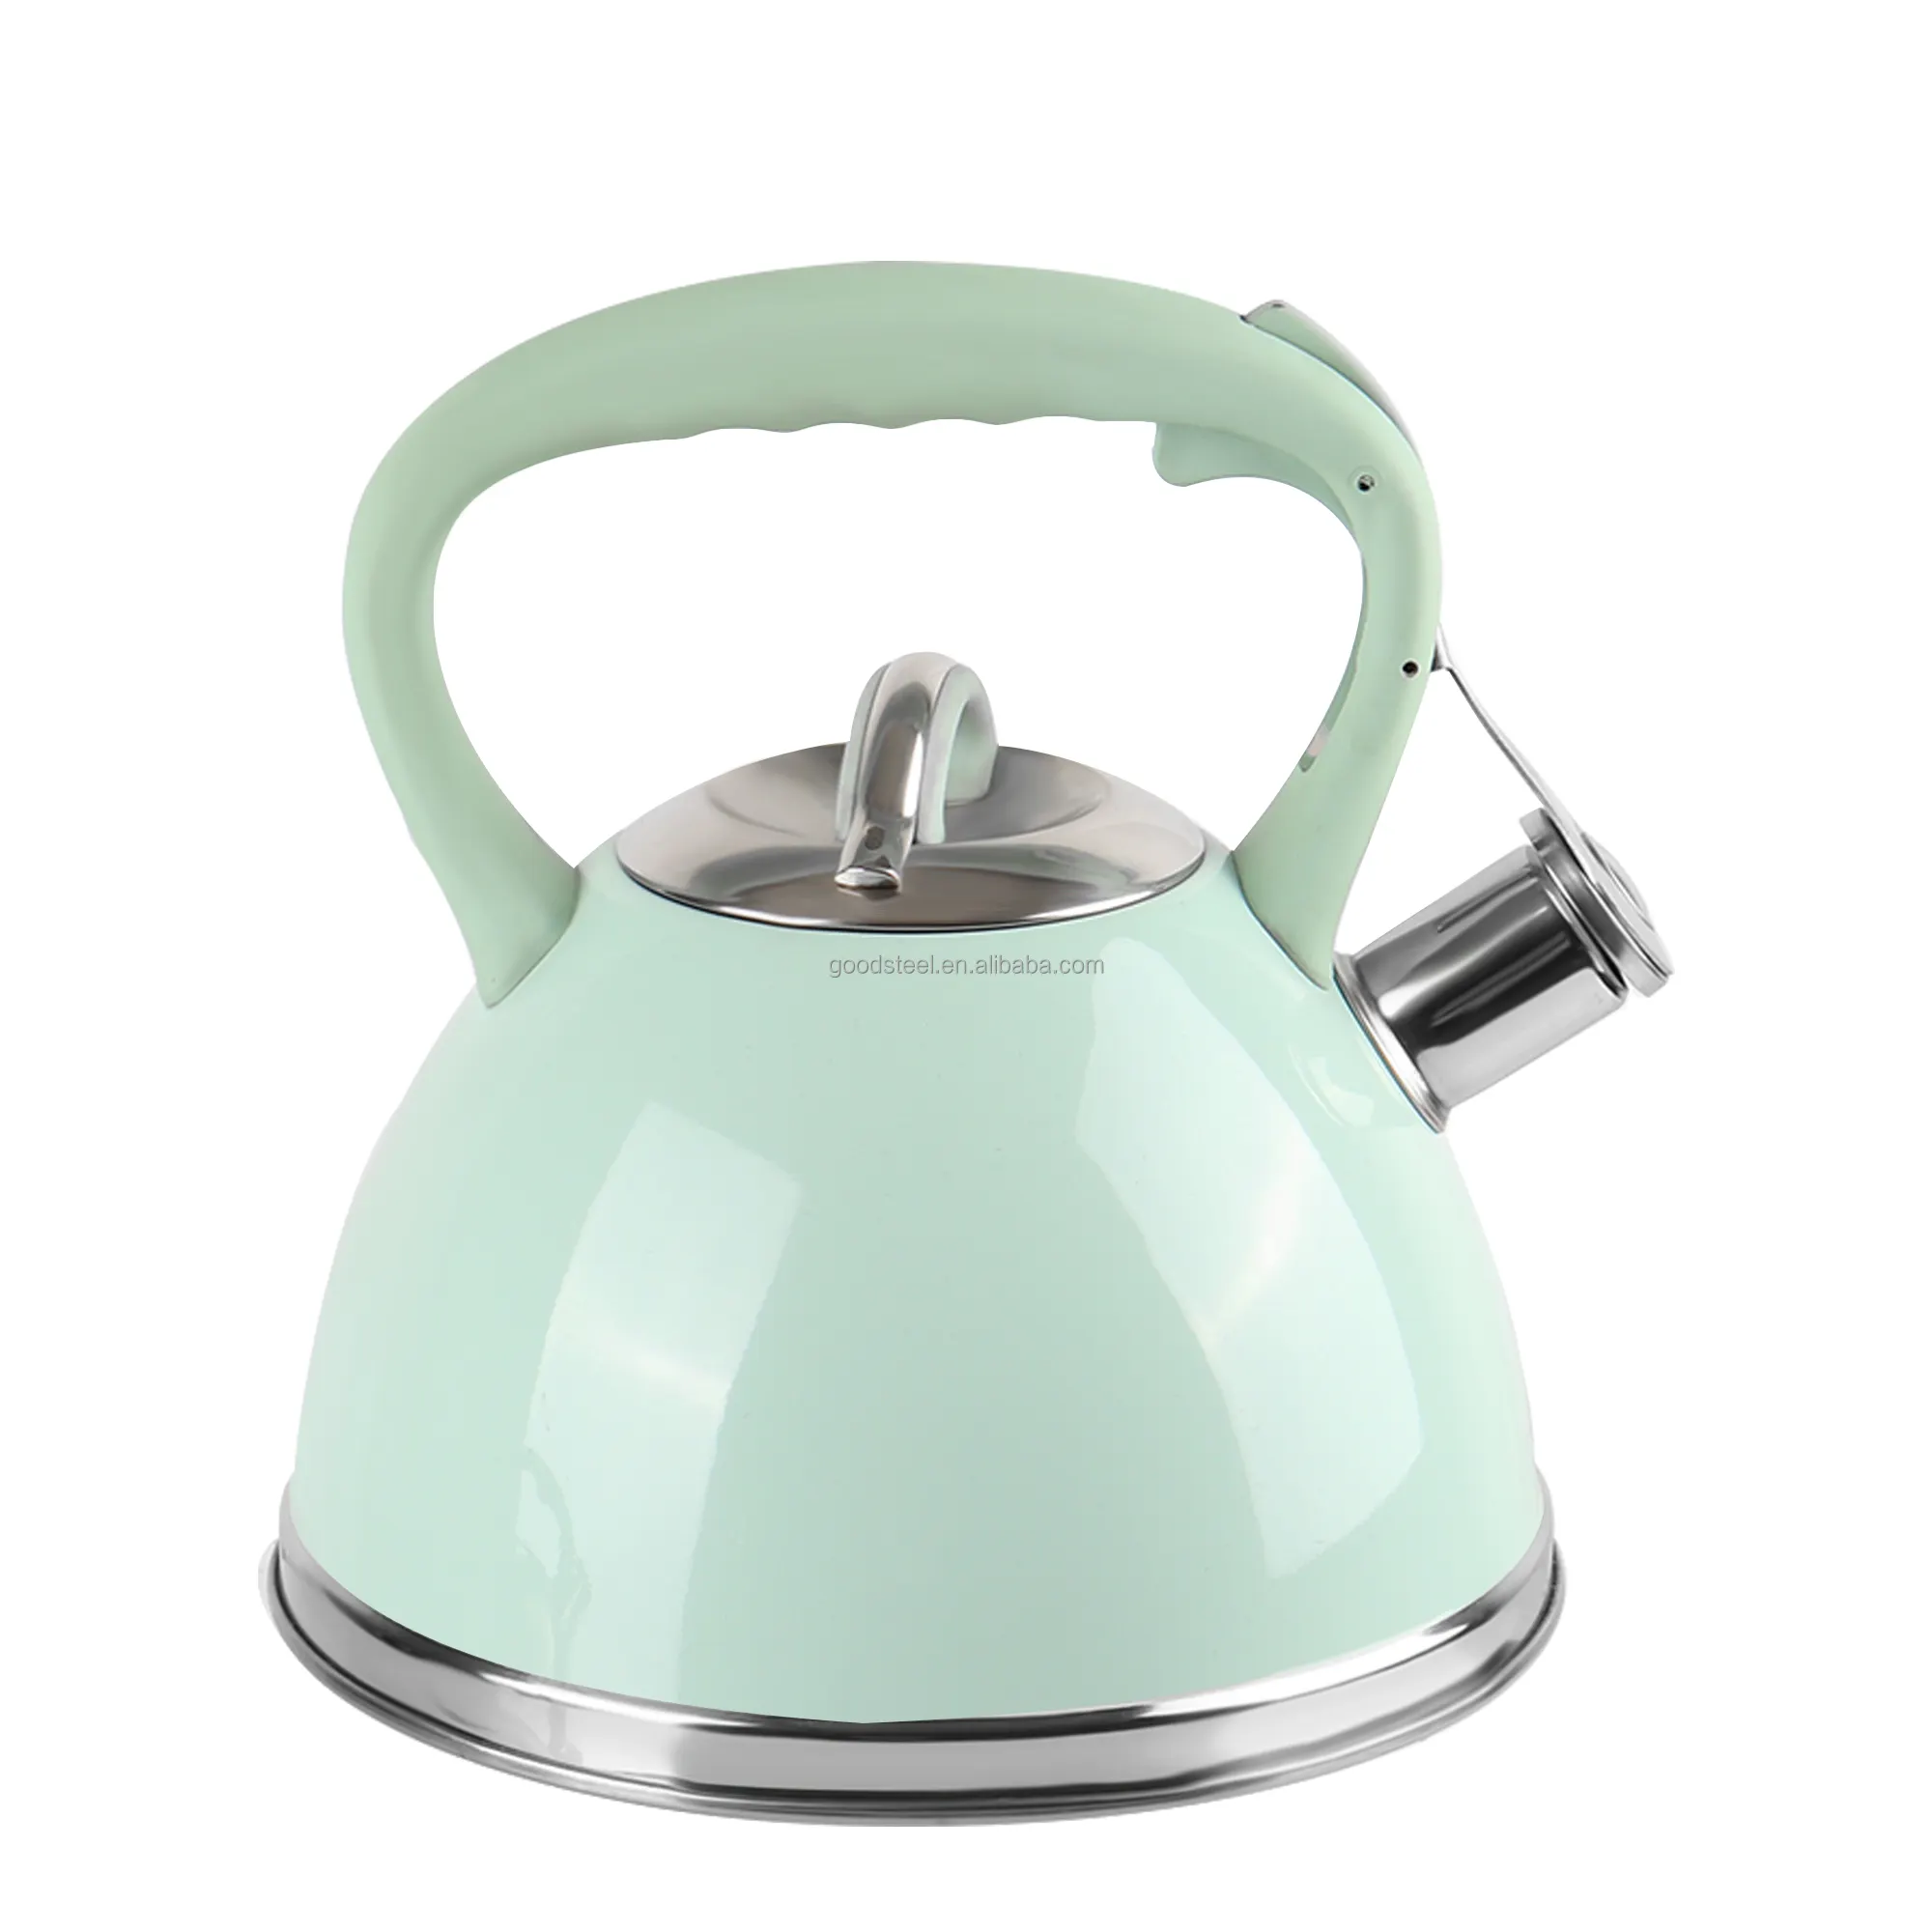 Luxury chaleira chaleira the kettle has a whistle stainless steel stovetop coloured whistling kettle